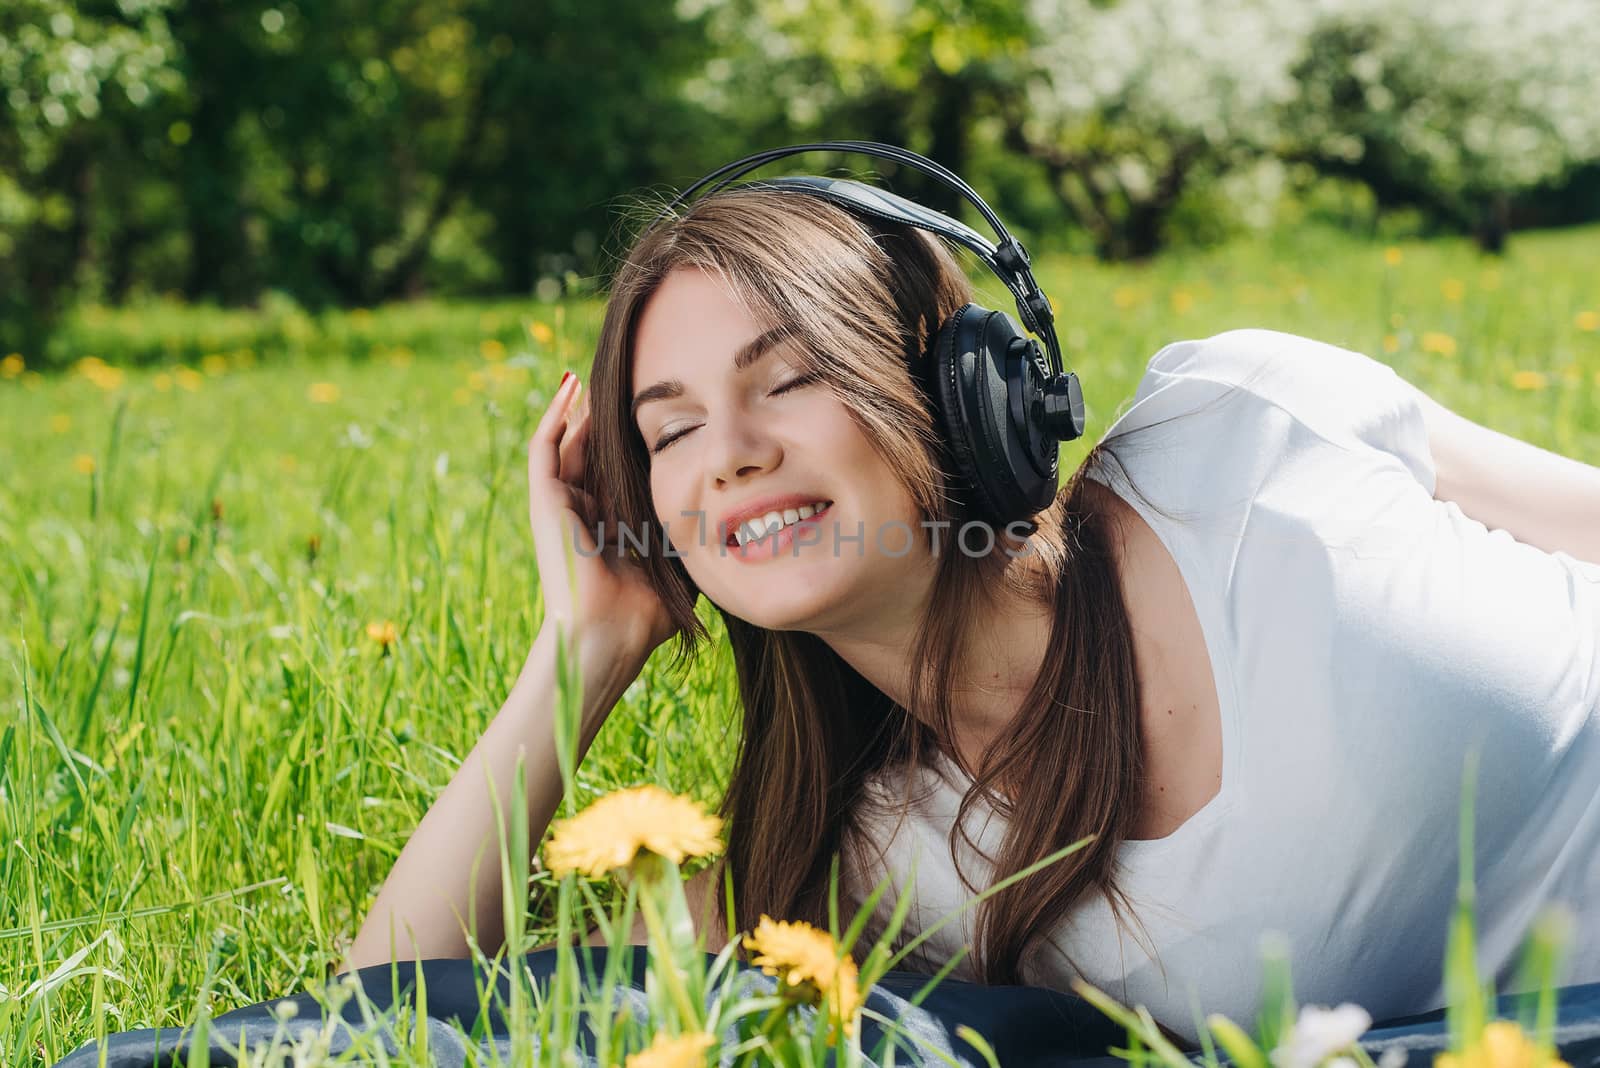 Young brunette woman with headphones listening to the music outdoors on sunny summer day